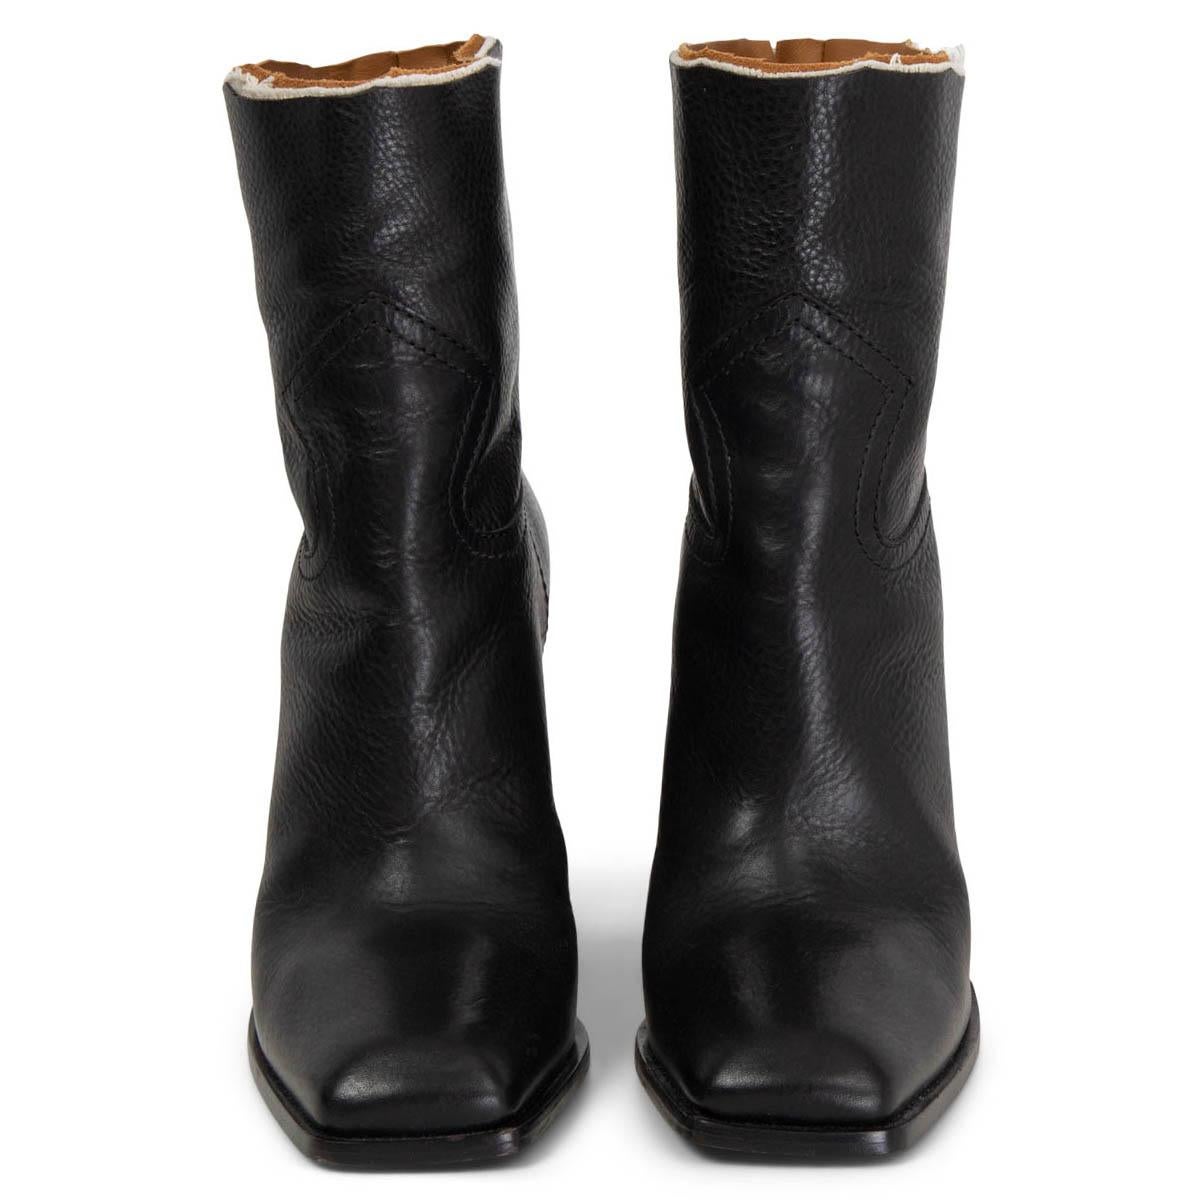 100% authentic Saint Laurent Jodie 105 western ankle boots in black calfskin with a raw cut-off top edge with off-white canvas and camel smooth leather lining. Boots feature a square toe and heel. Have been worn once or twice and are in excellent